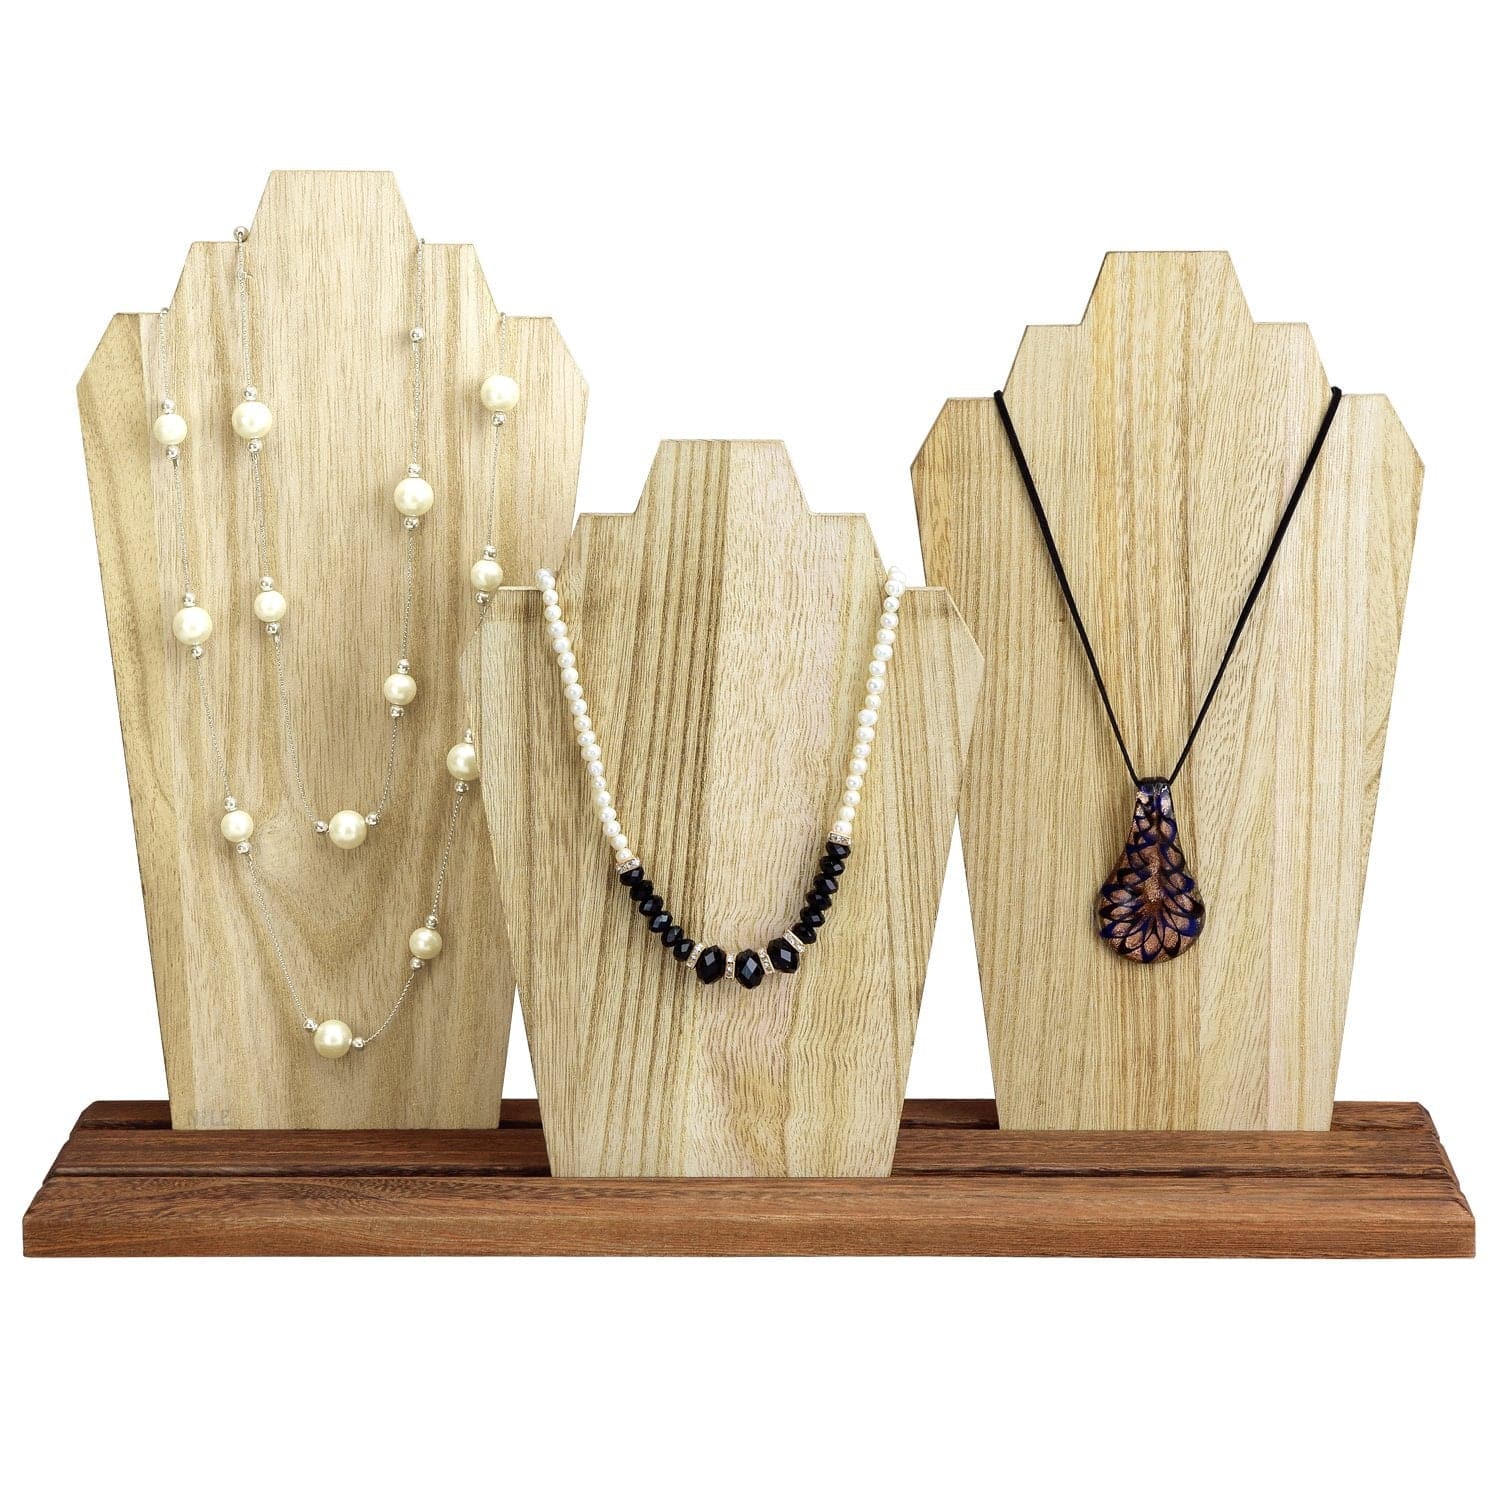 Second Life Marketplace - Necklace Display Bust (Wood)